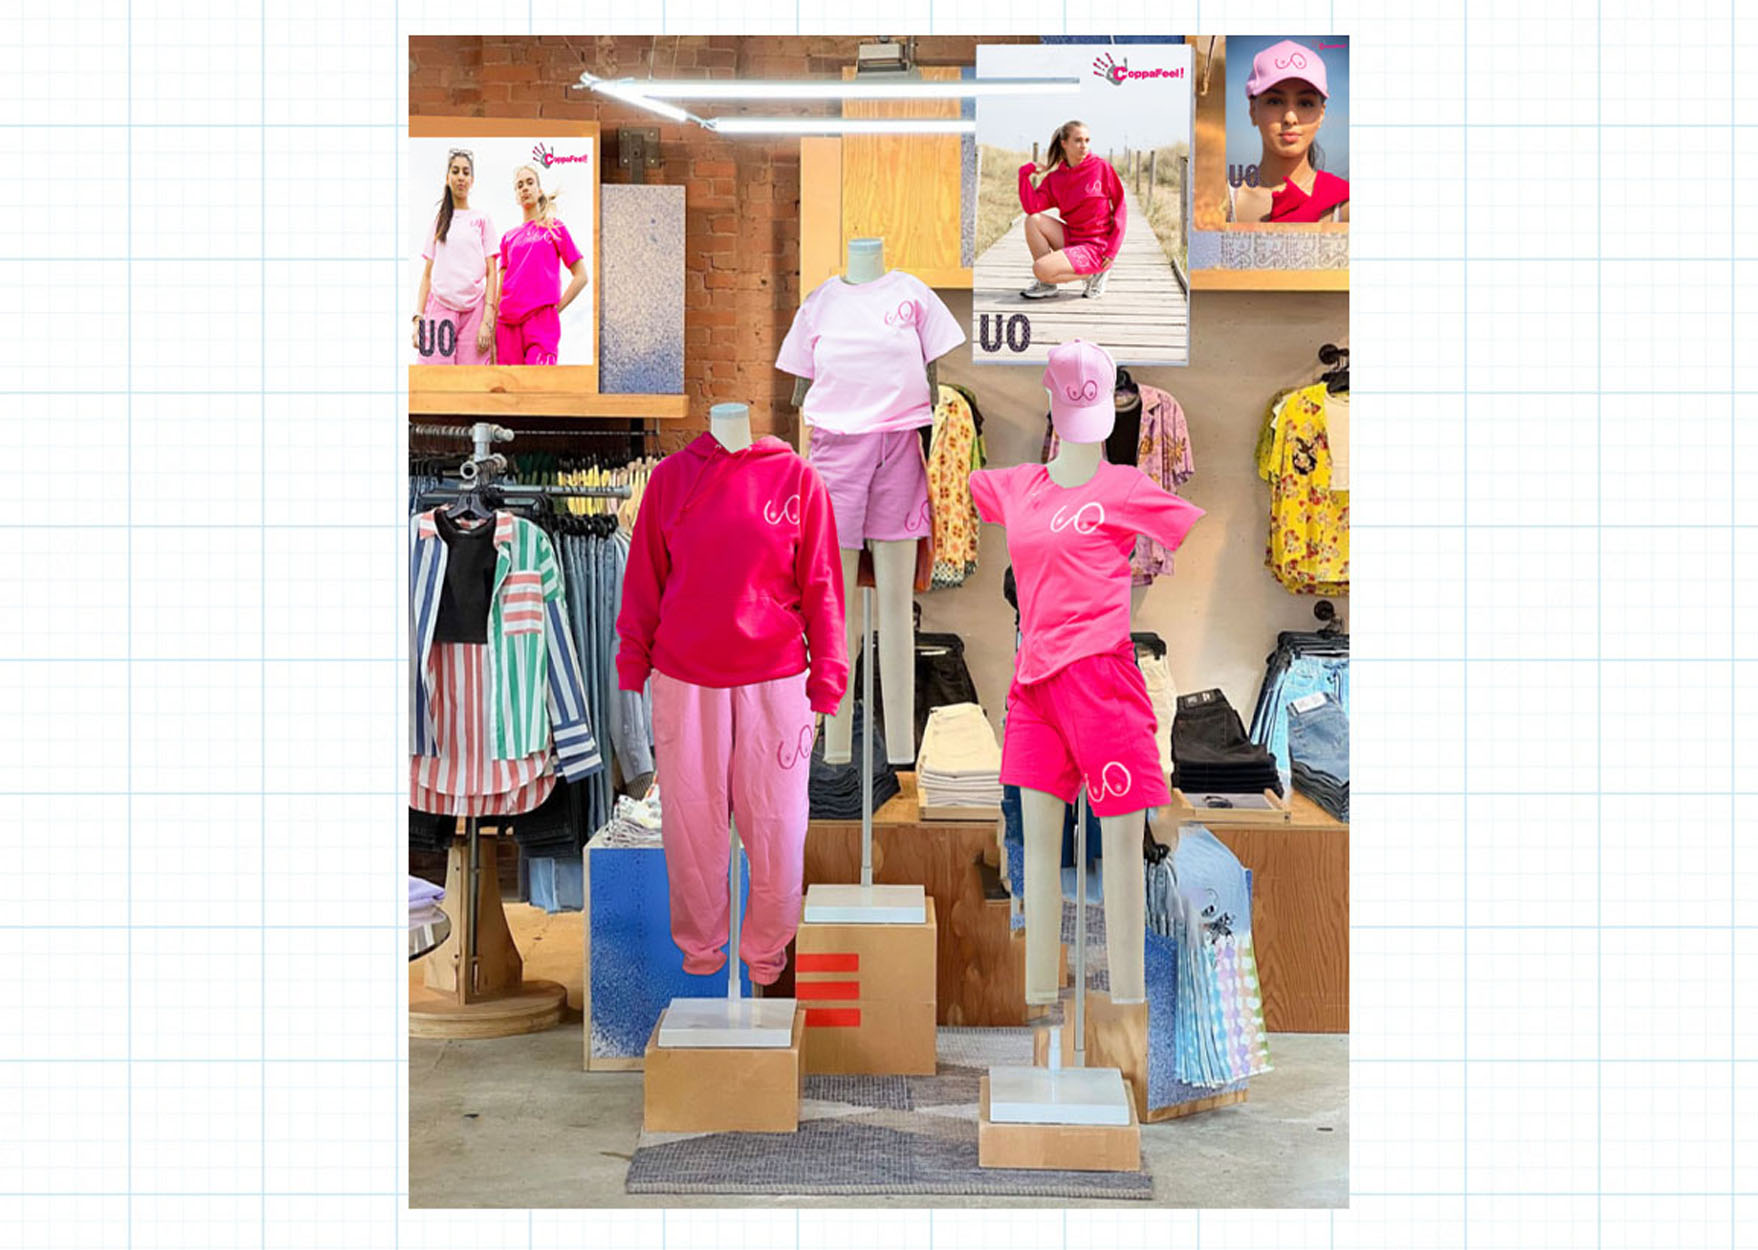 This Mockup shows how the collection would be featured in an Urban Outfitters store, with three mannequins as a feature